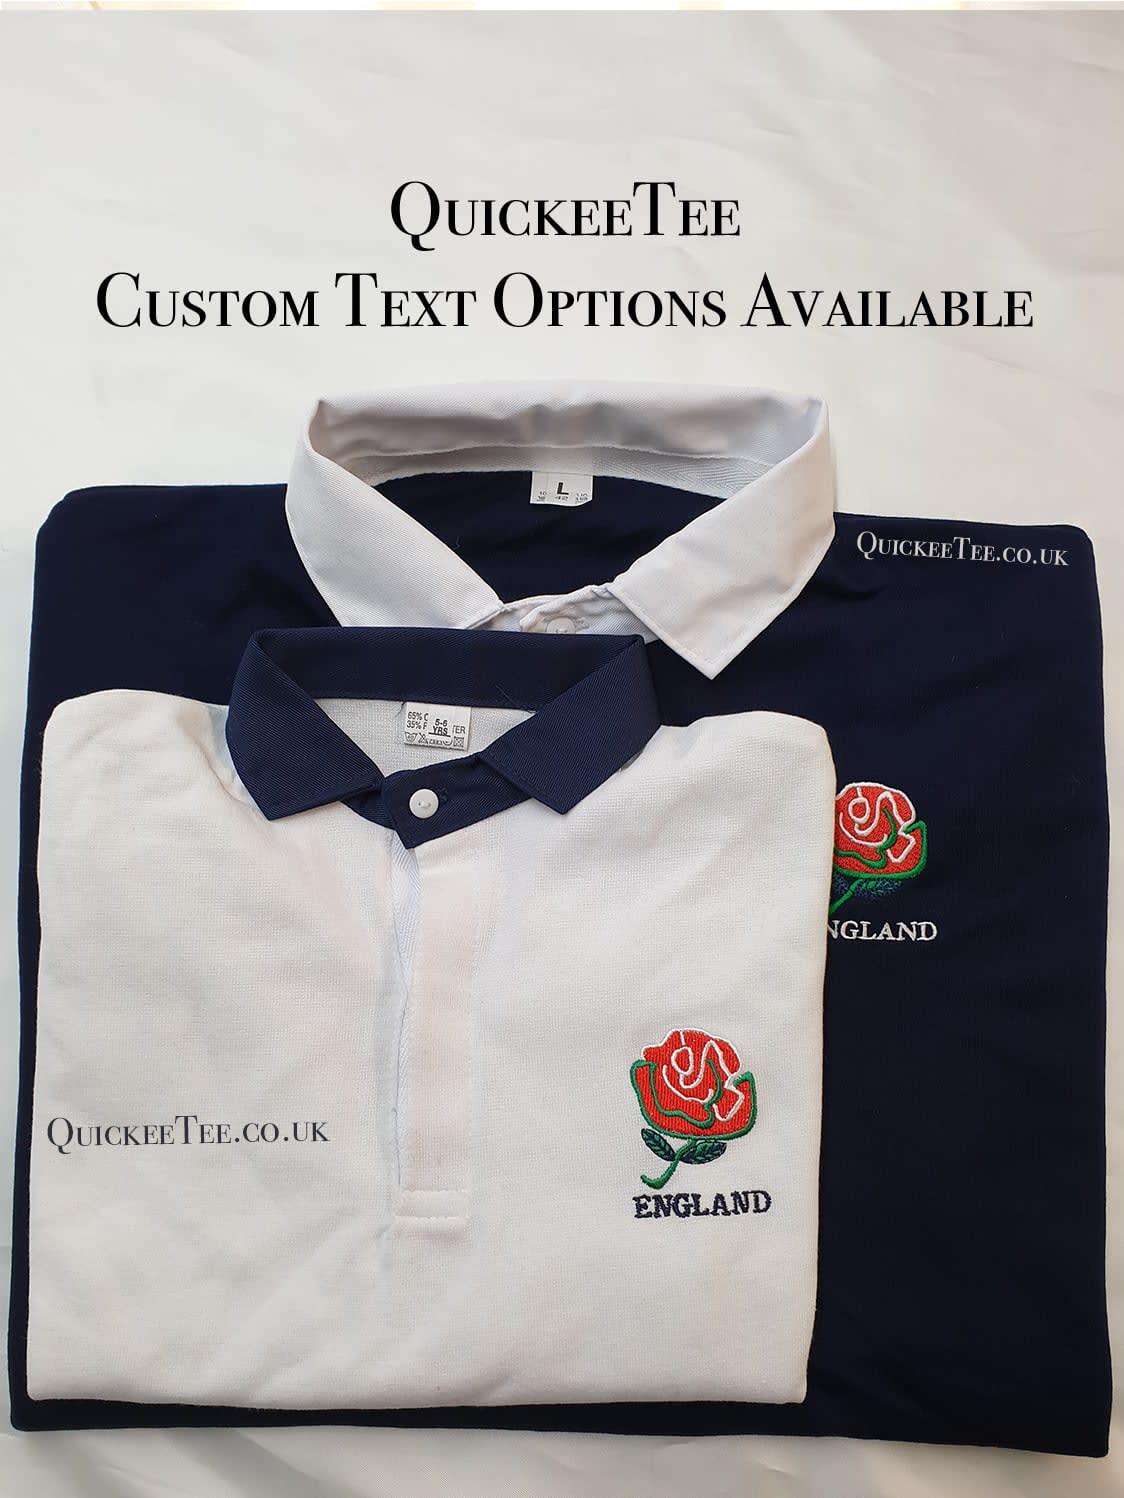 Custom Personalised) Welsh Rugby Union - Celtic Warriors Polo Shirt  Original Style - Green, Custom Text And Number K8